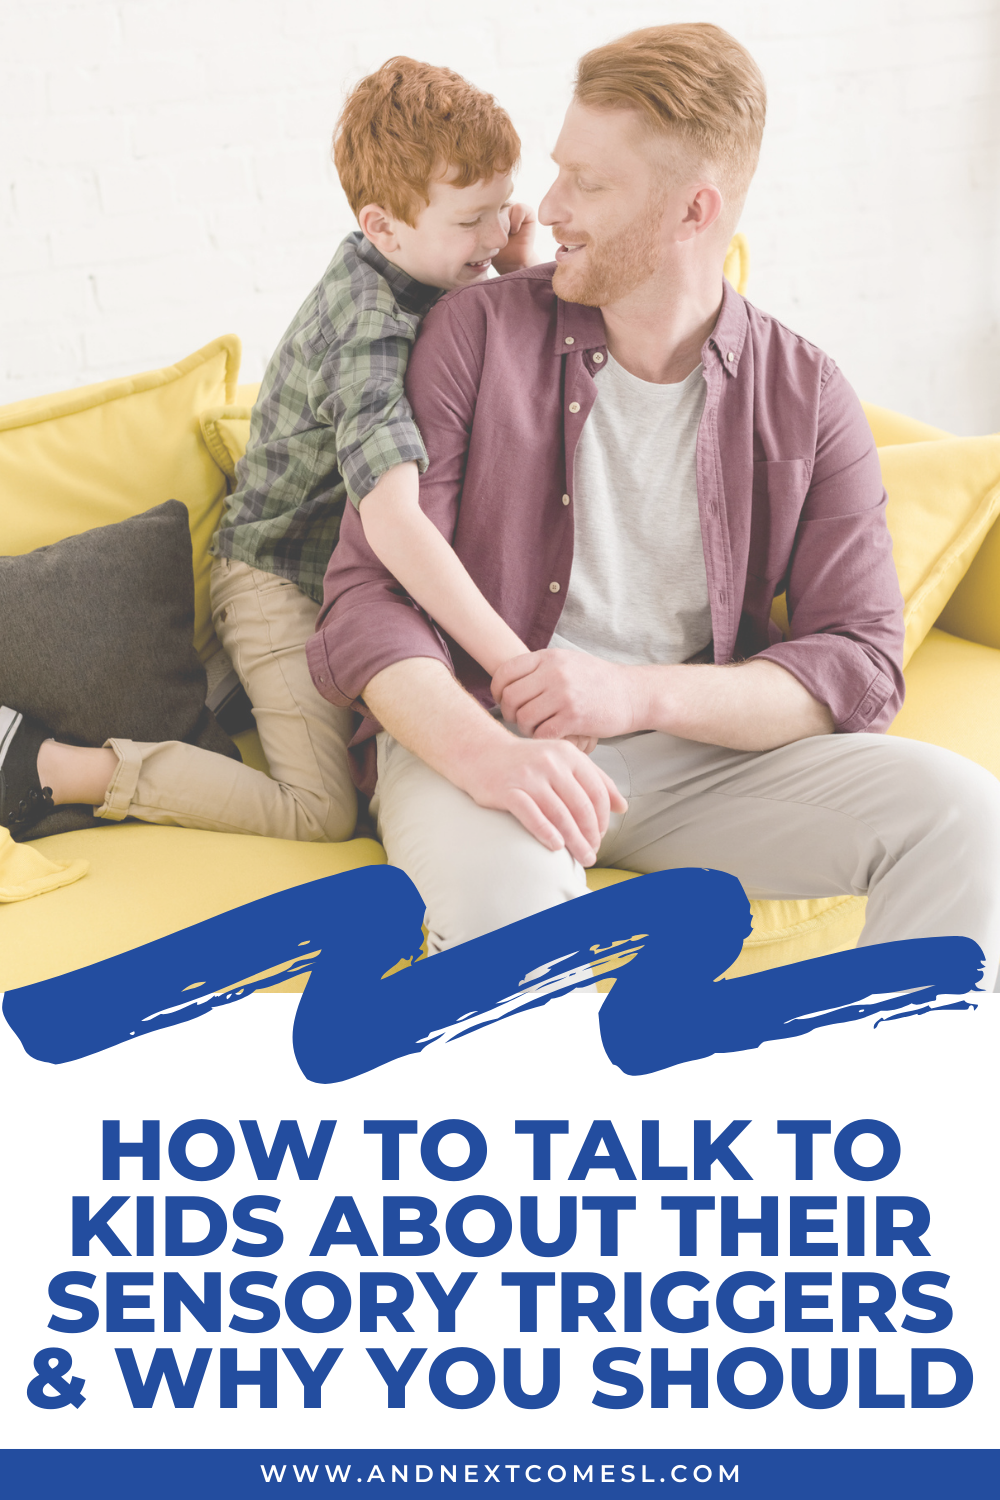 Tips for how to talk to kids about their sensory triggers and the reasons why you should